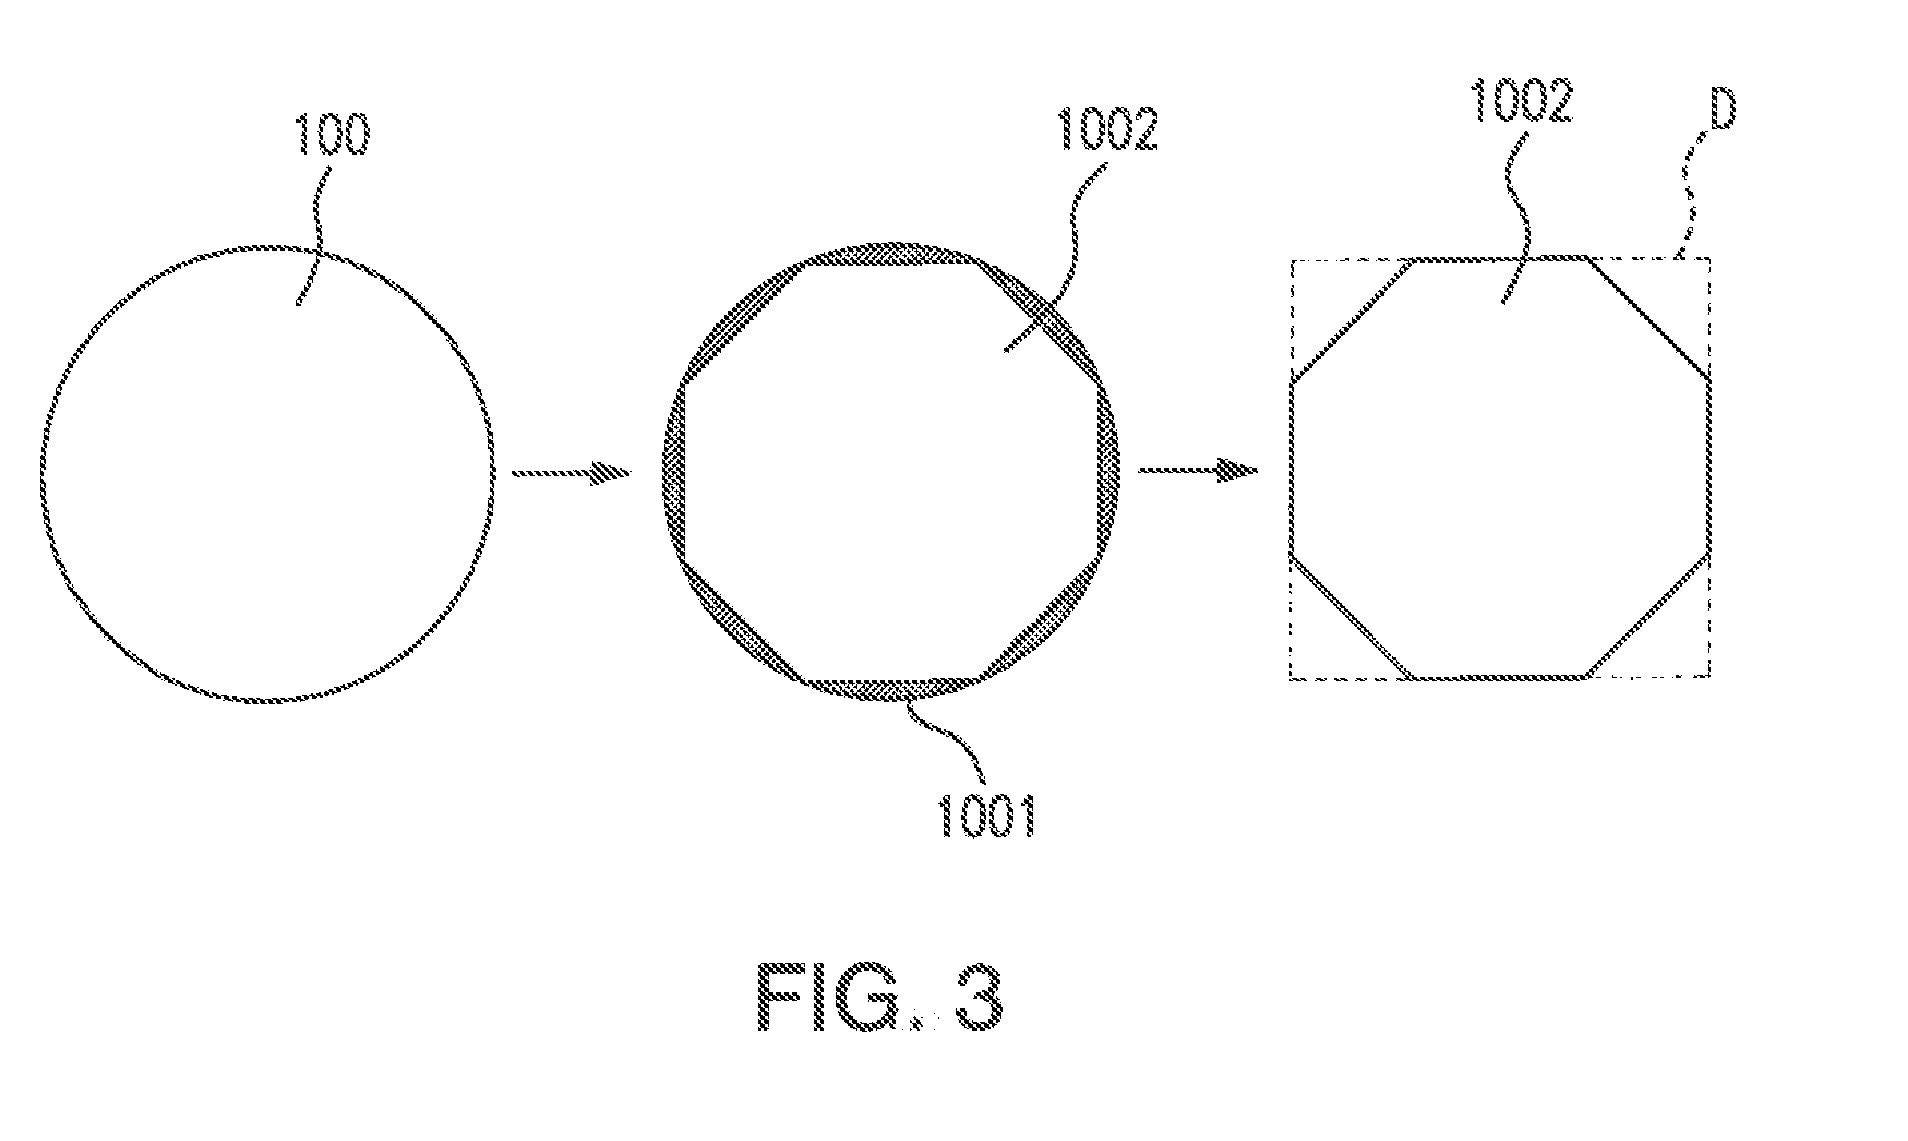 Method for producing solar cells and solar cell assemblies